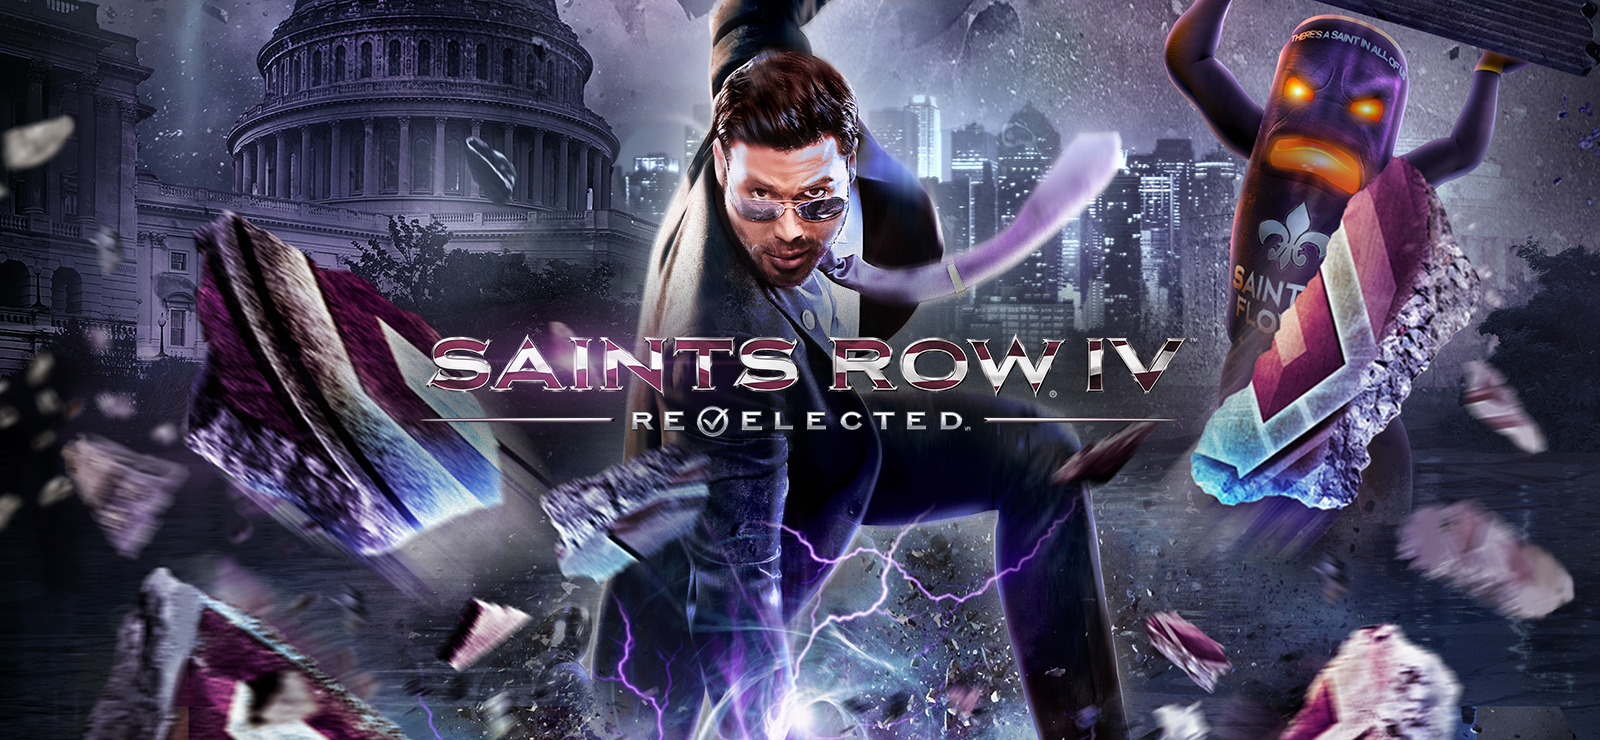 Buy Saints Row Gat Out of Hell CD Key Compare Prices